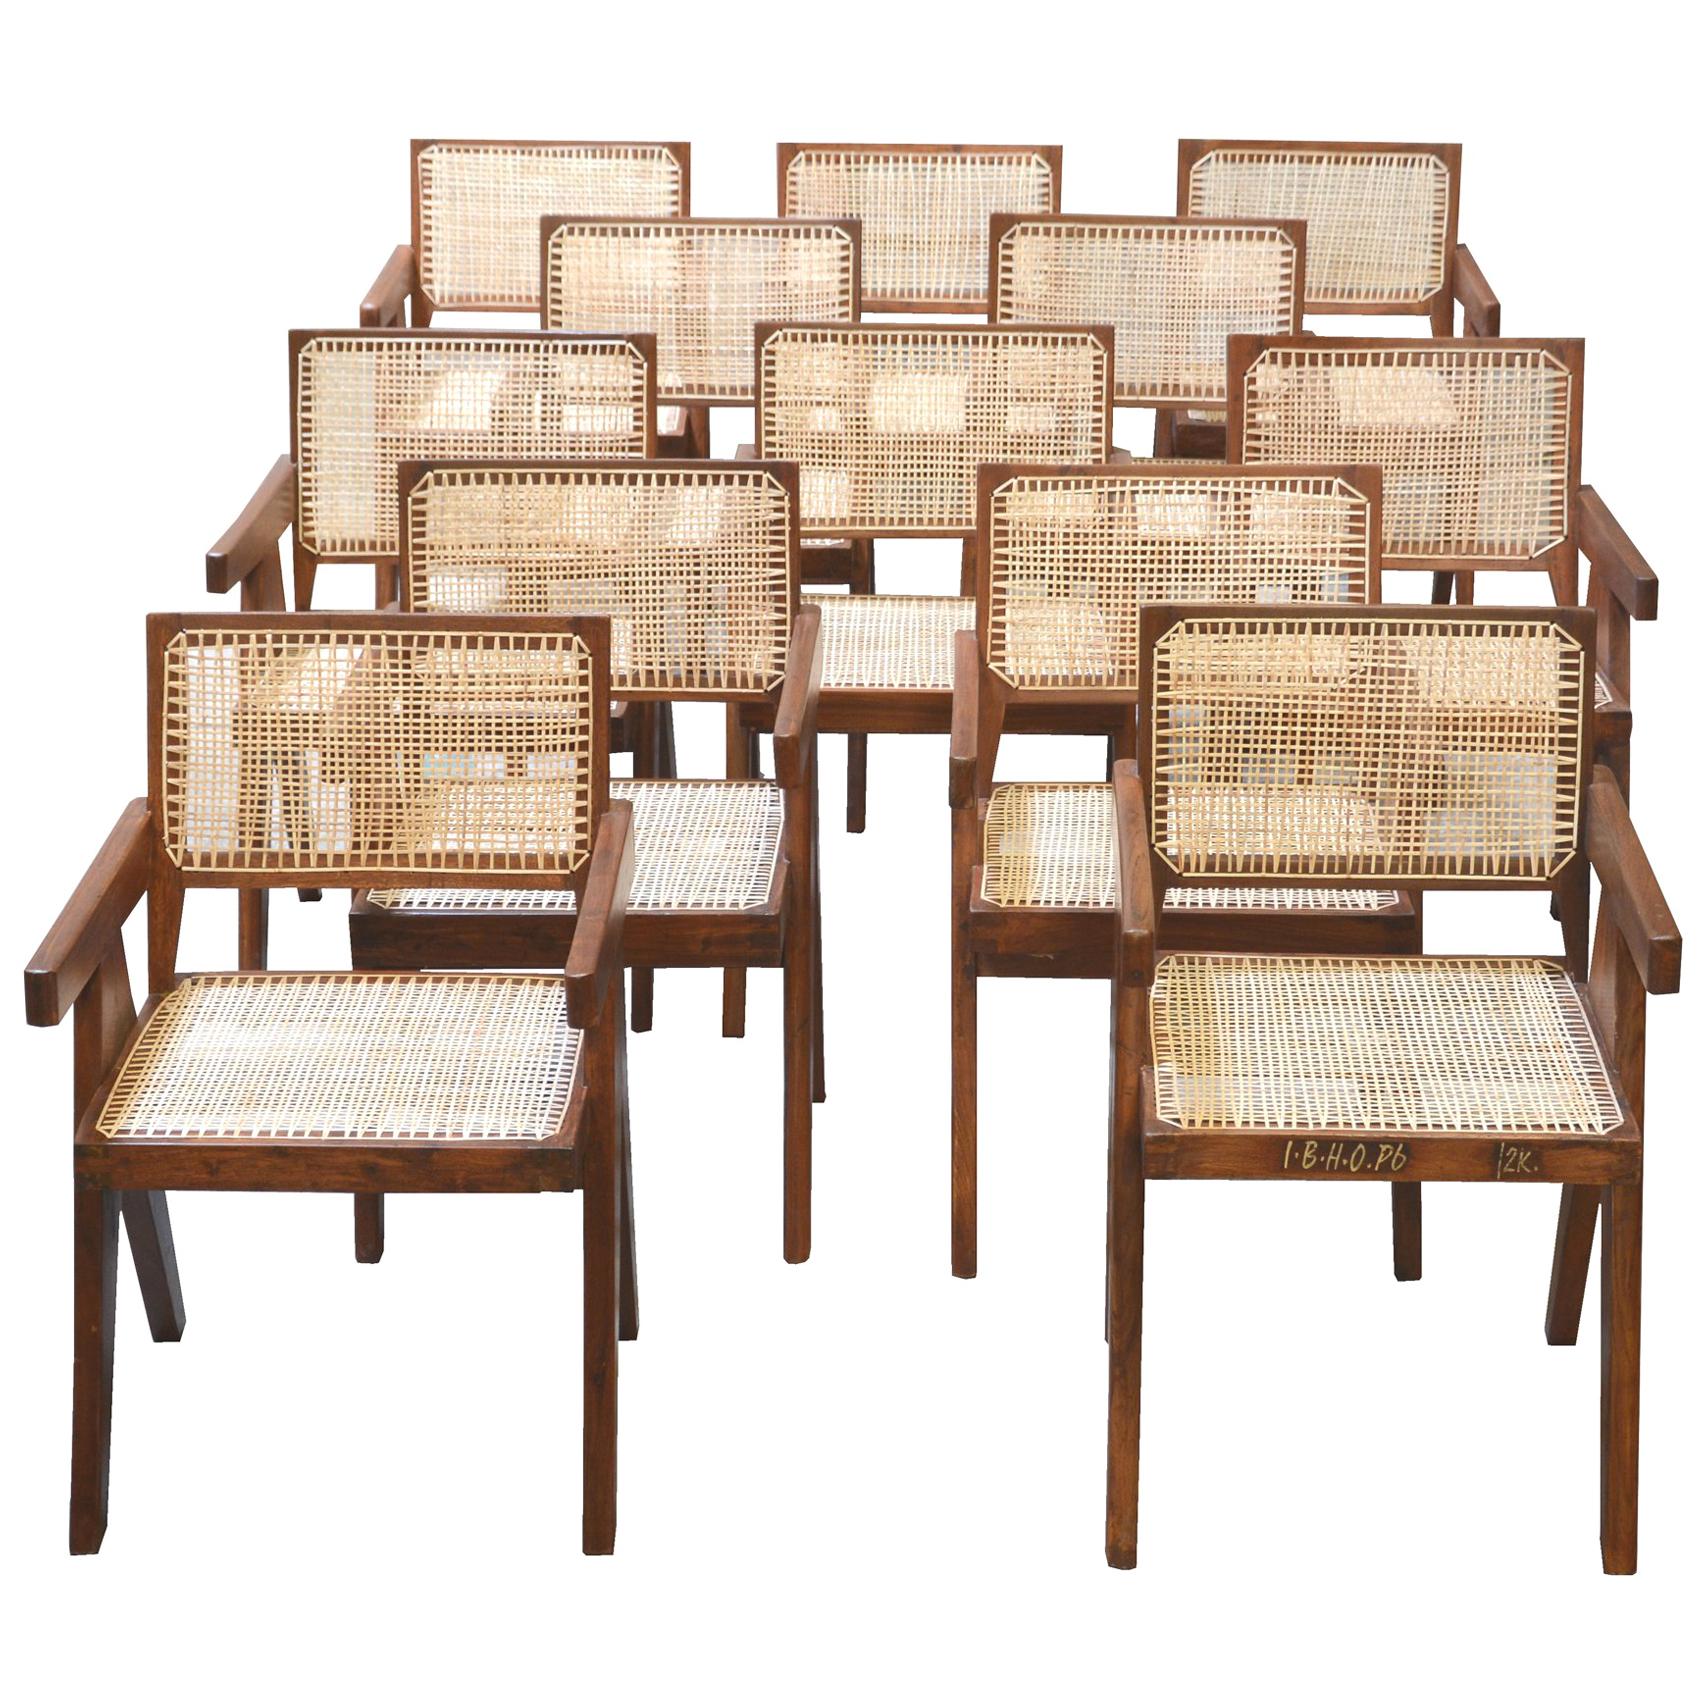 Pierre Jeanneret, Rare Set of 12 Chairs For Sale